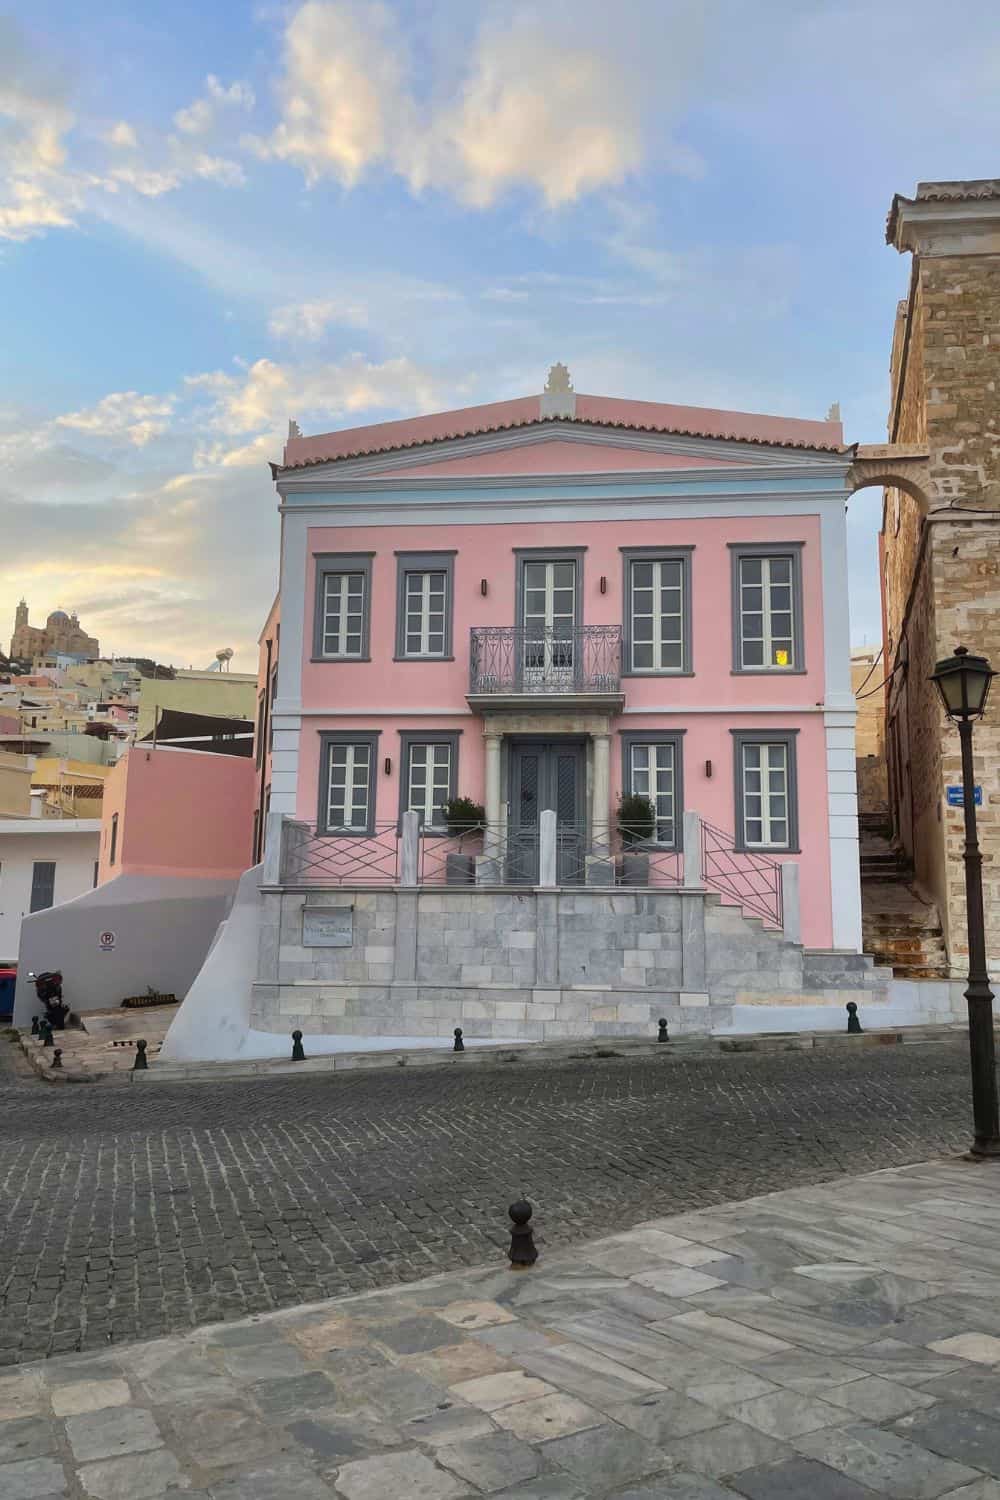 A charming, two-story pink neoclassical building with contrasting grey stone foundation and ornate metal balcony railings, located on a cobblestone street corner in a historic neighborhood, with a clear blue sky above.